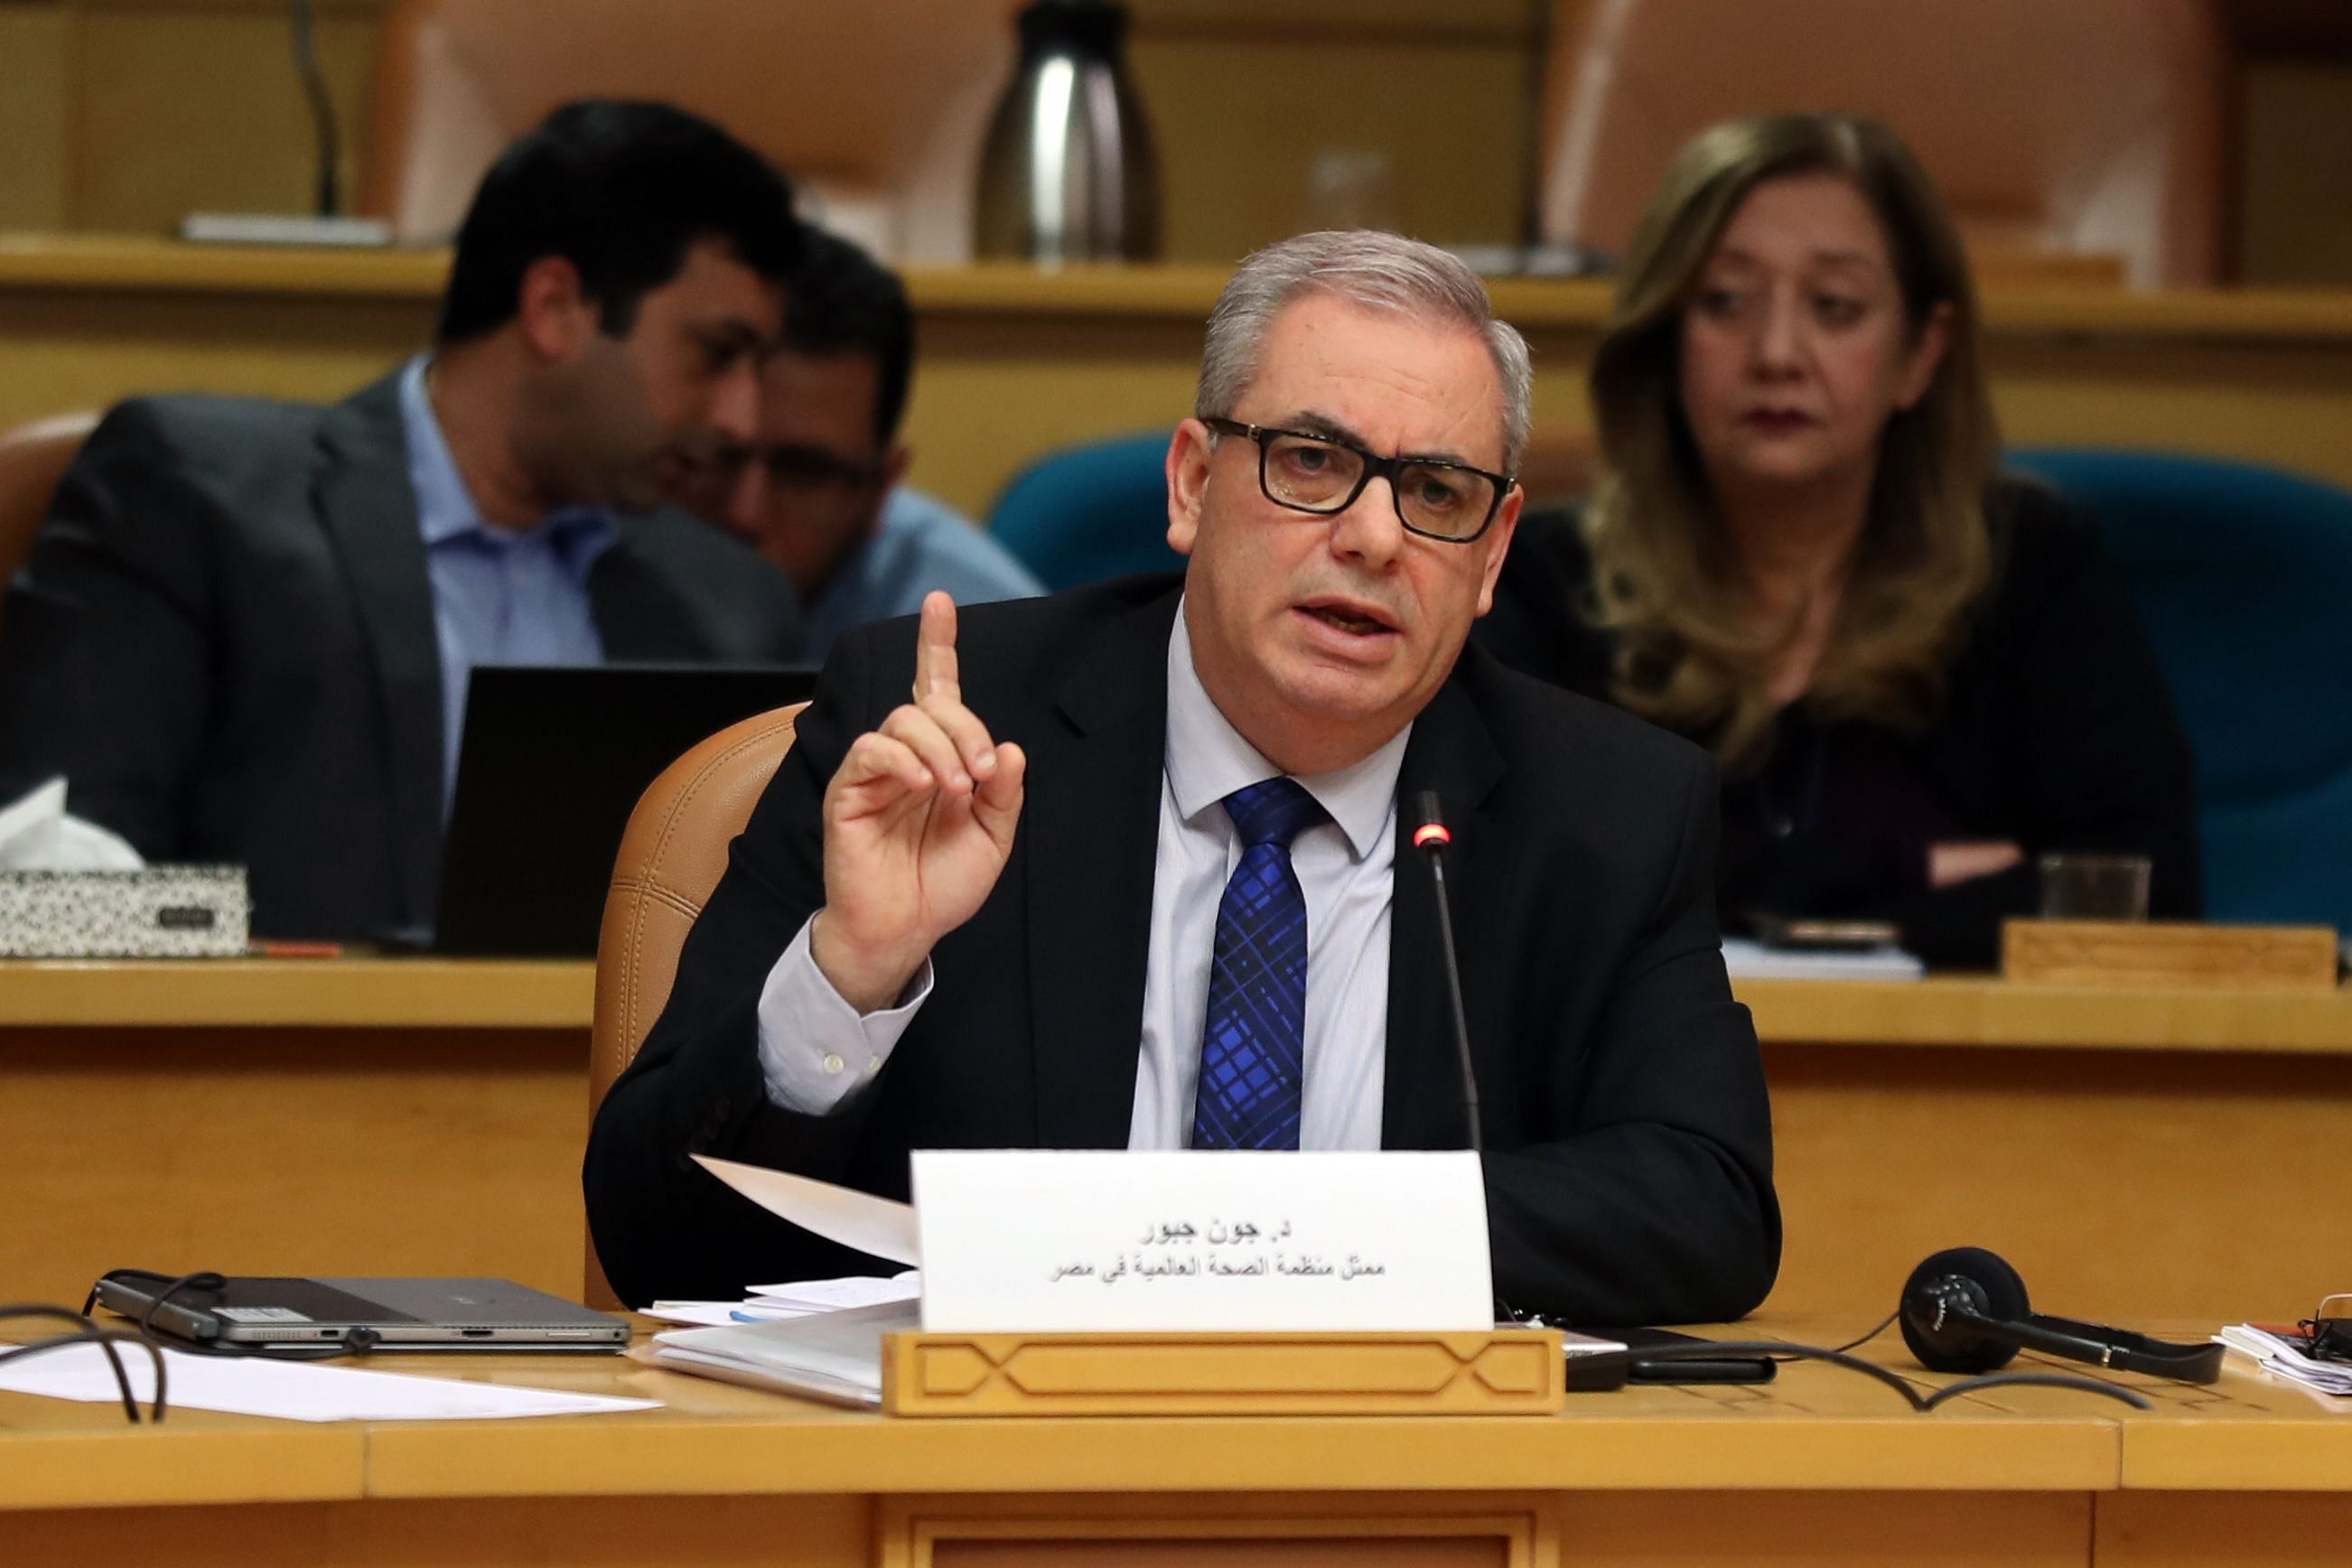 John Jabbour, the WHO's representatine in Egypt, speaks during a press briefing at the World Health Organisation's regional office in the Egyptian capital Cairo. (AFP Photo)